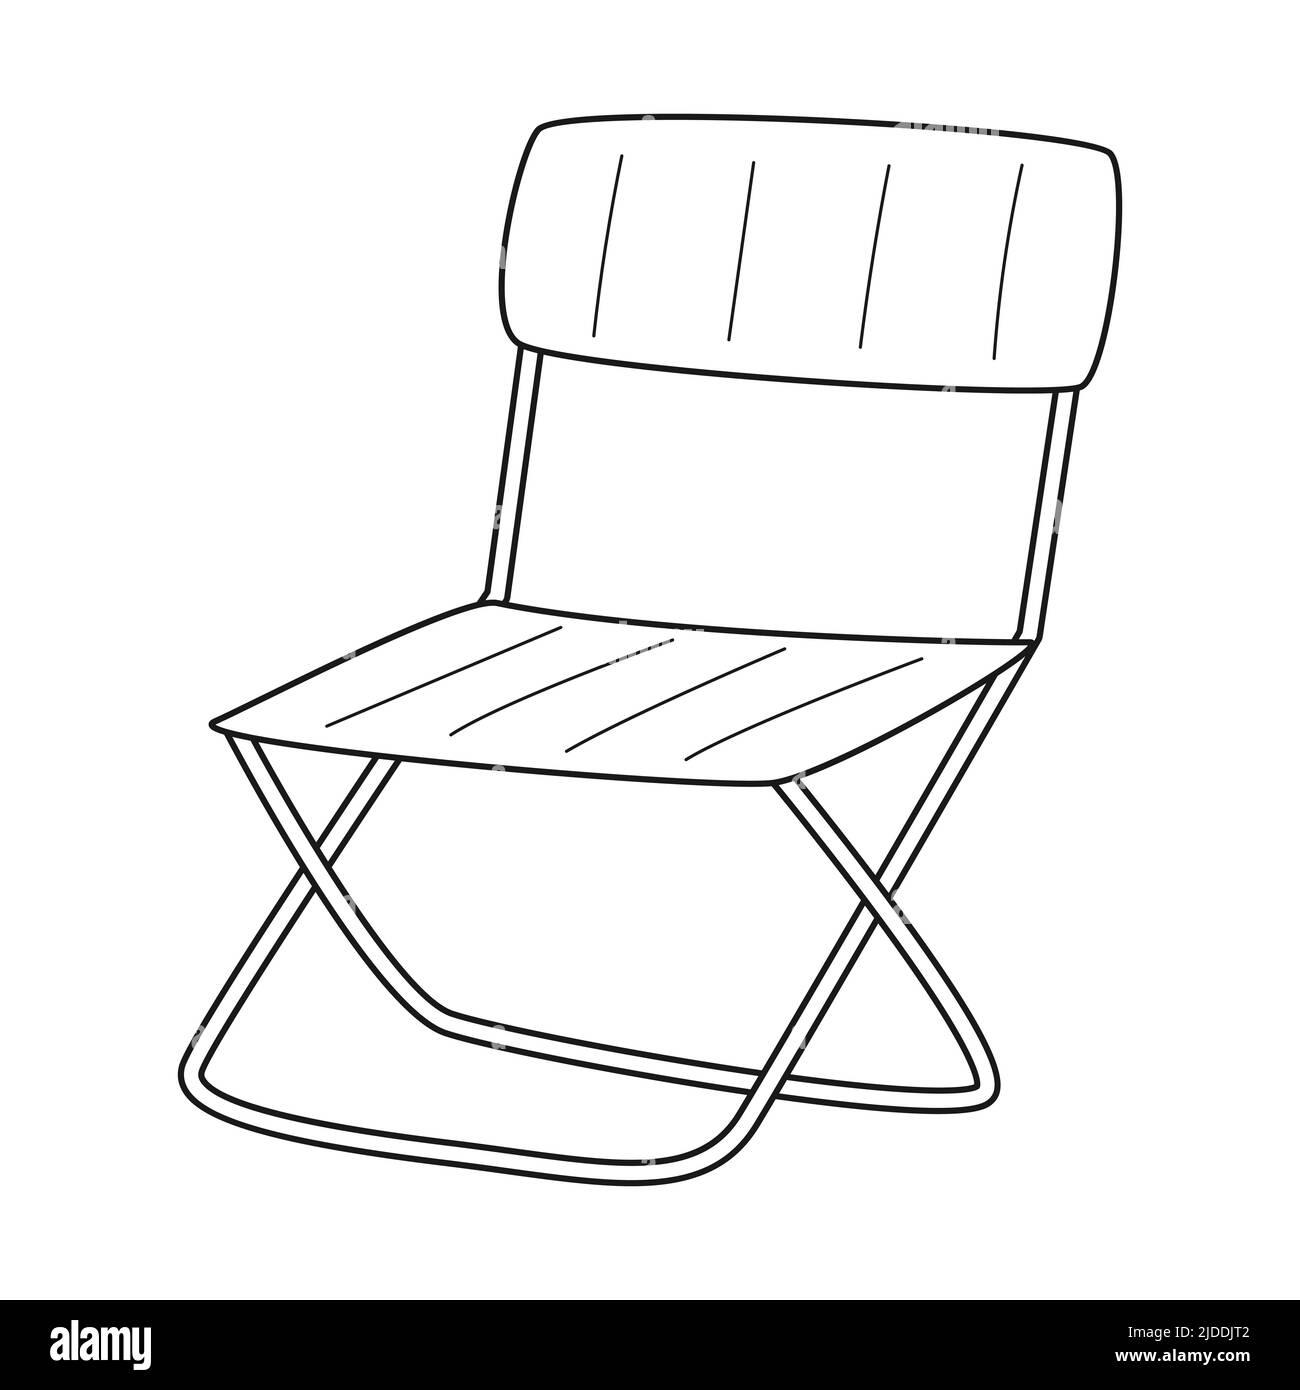 Doodle Tourist folding chair. Camping equipment, car travel, garden. A piece of furniture. Outline black and white vector illustration isolated on a w Stock Vector